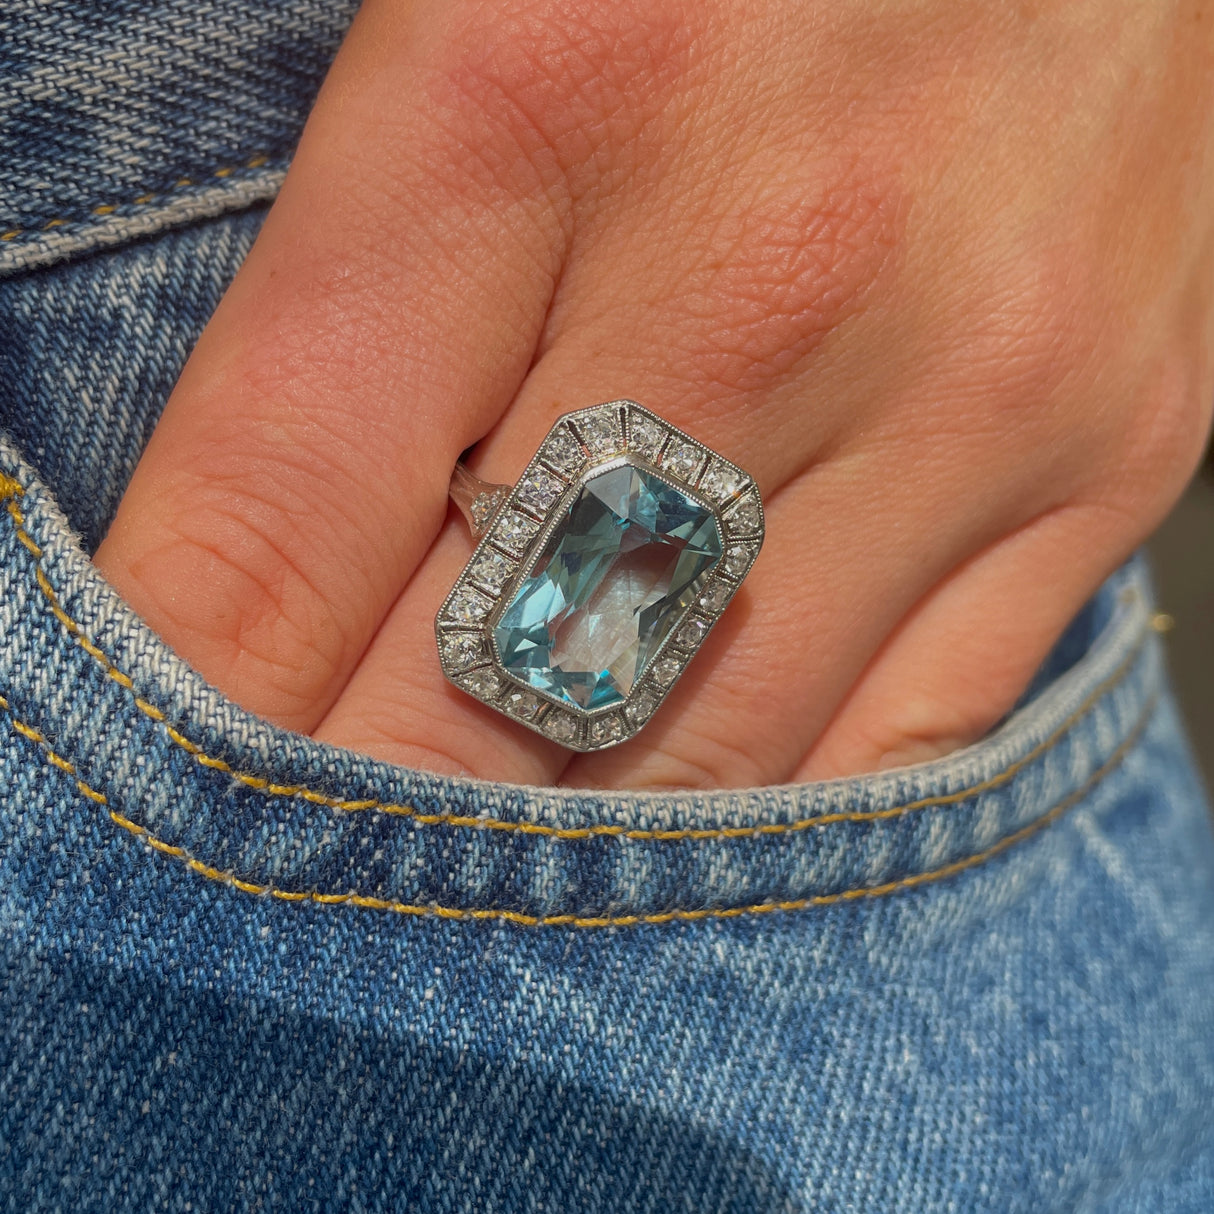 Art Deco aquamarine and diamond cluster ring,  worn on hand in pocket of jeans.